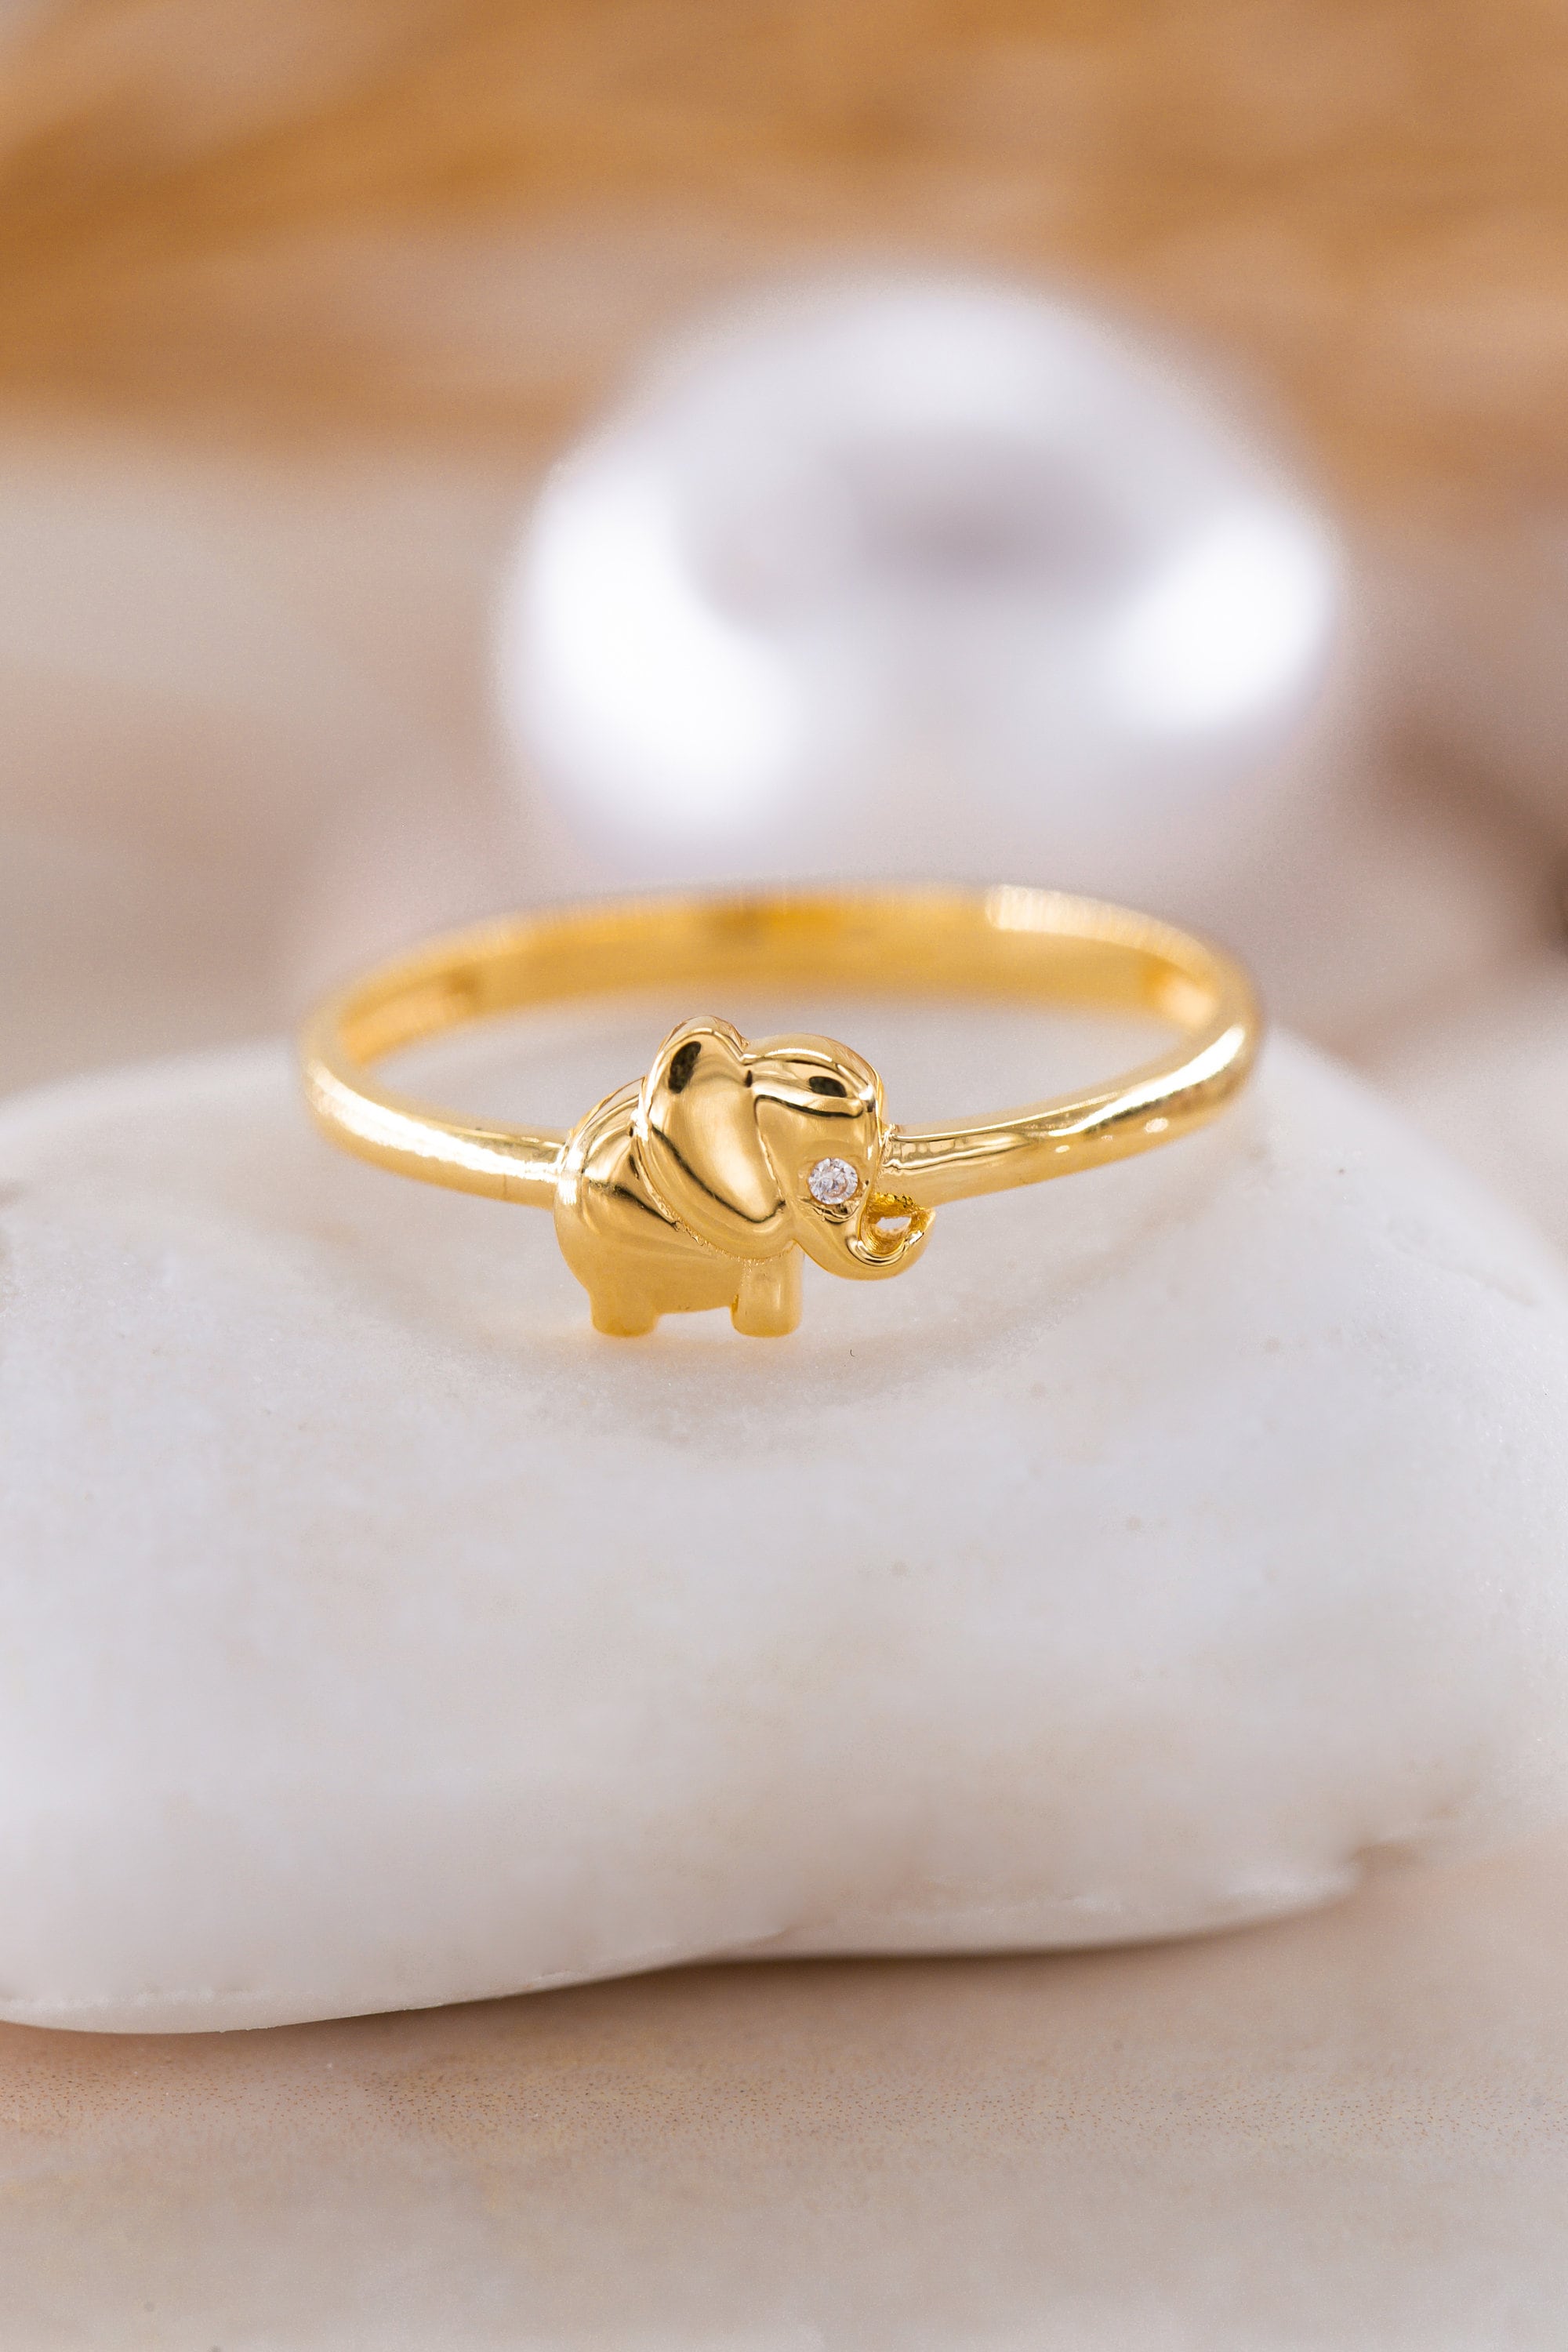 14K Solid Gold Elephant Ring, 925 Sterling Silver Elephant Ring, Animal Gold Ring, Birthday Gift, Elephant Figurine Ring, Elephant Jewellery